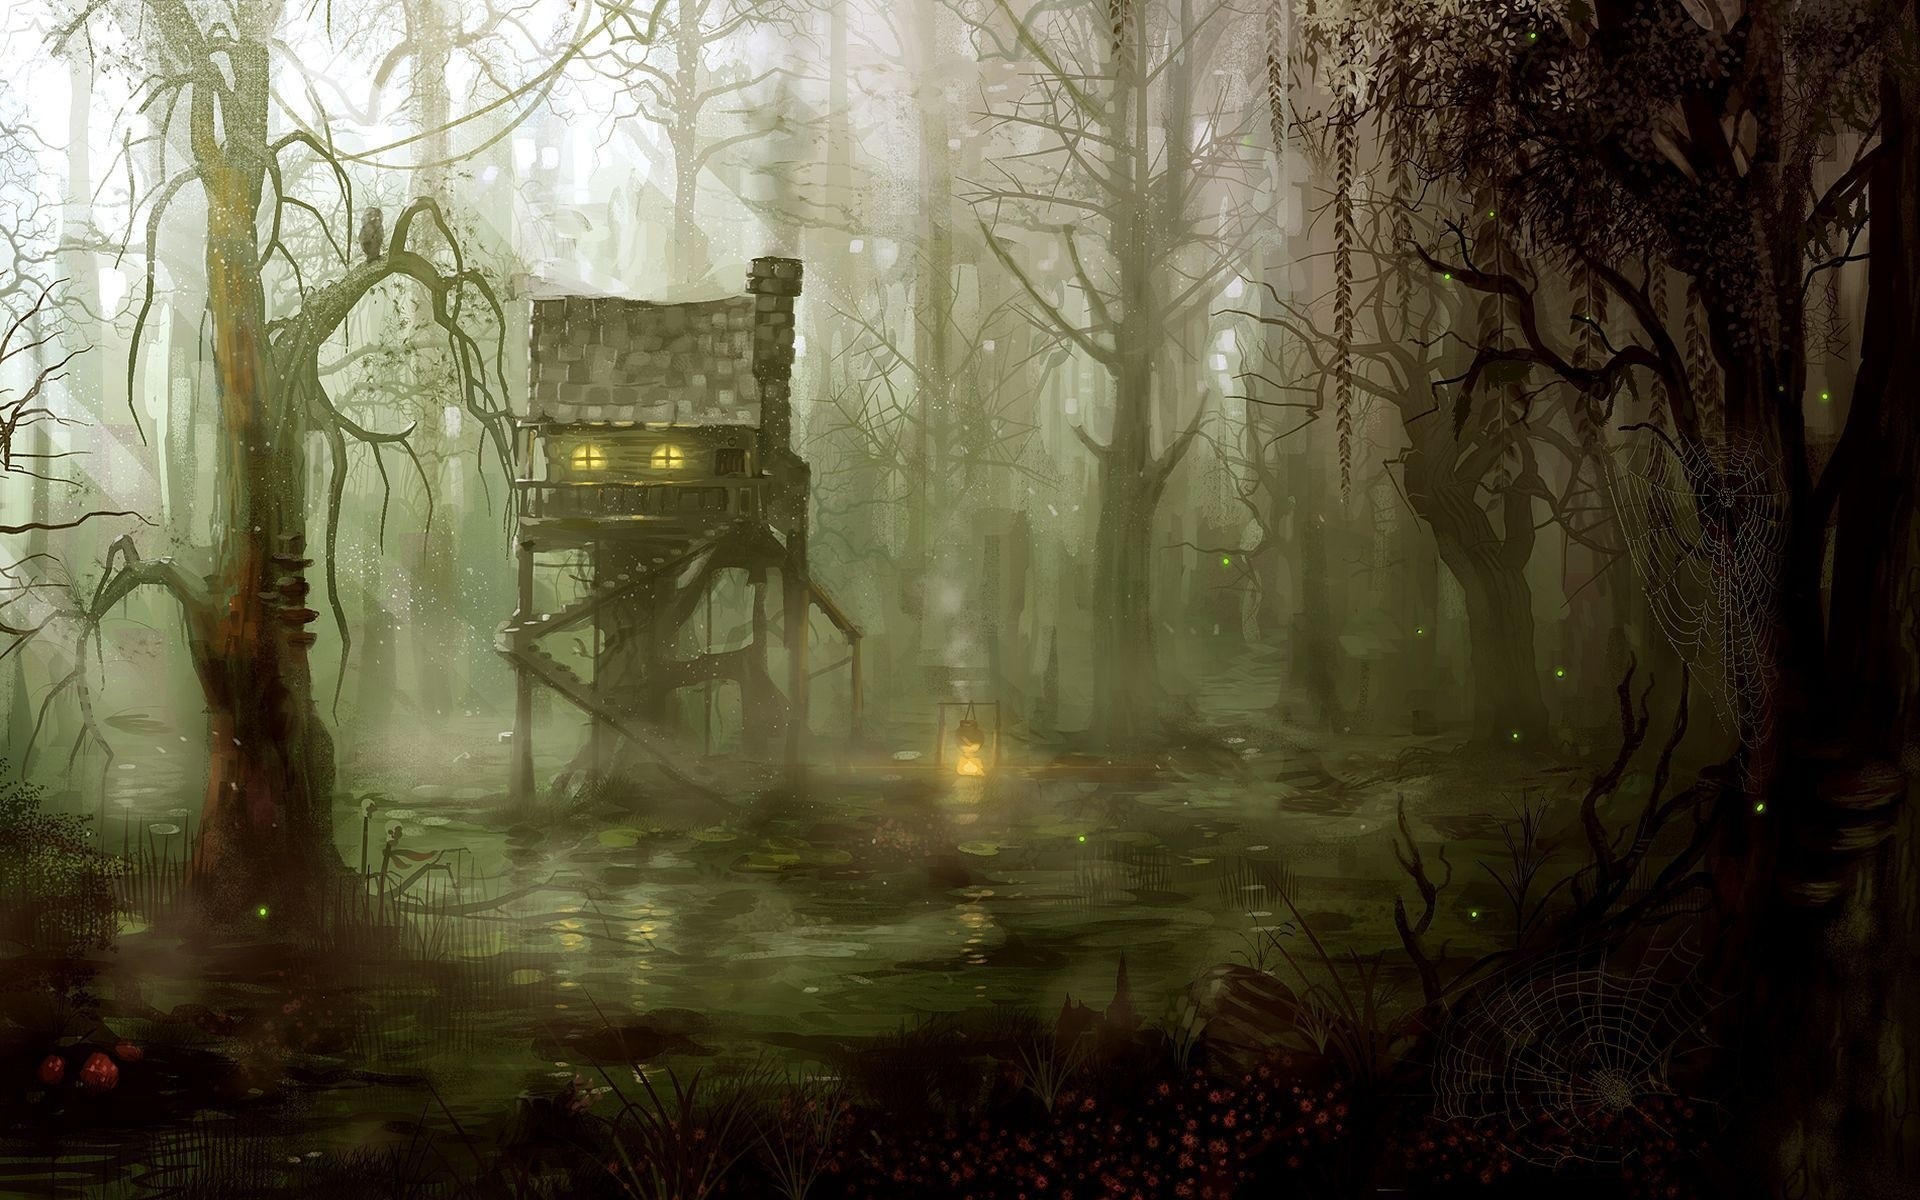 1920x1200 spooky, humor background images, forest, artistic, dark, art, abstract  stock images houses, jungle, swamp, buildings,fantasy, architecture, fire,  lakes, ...